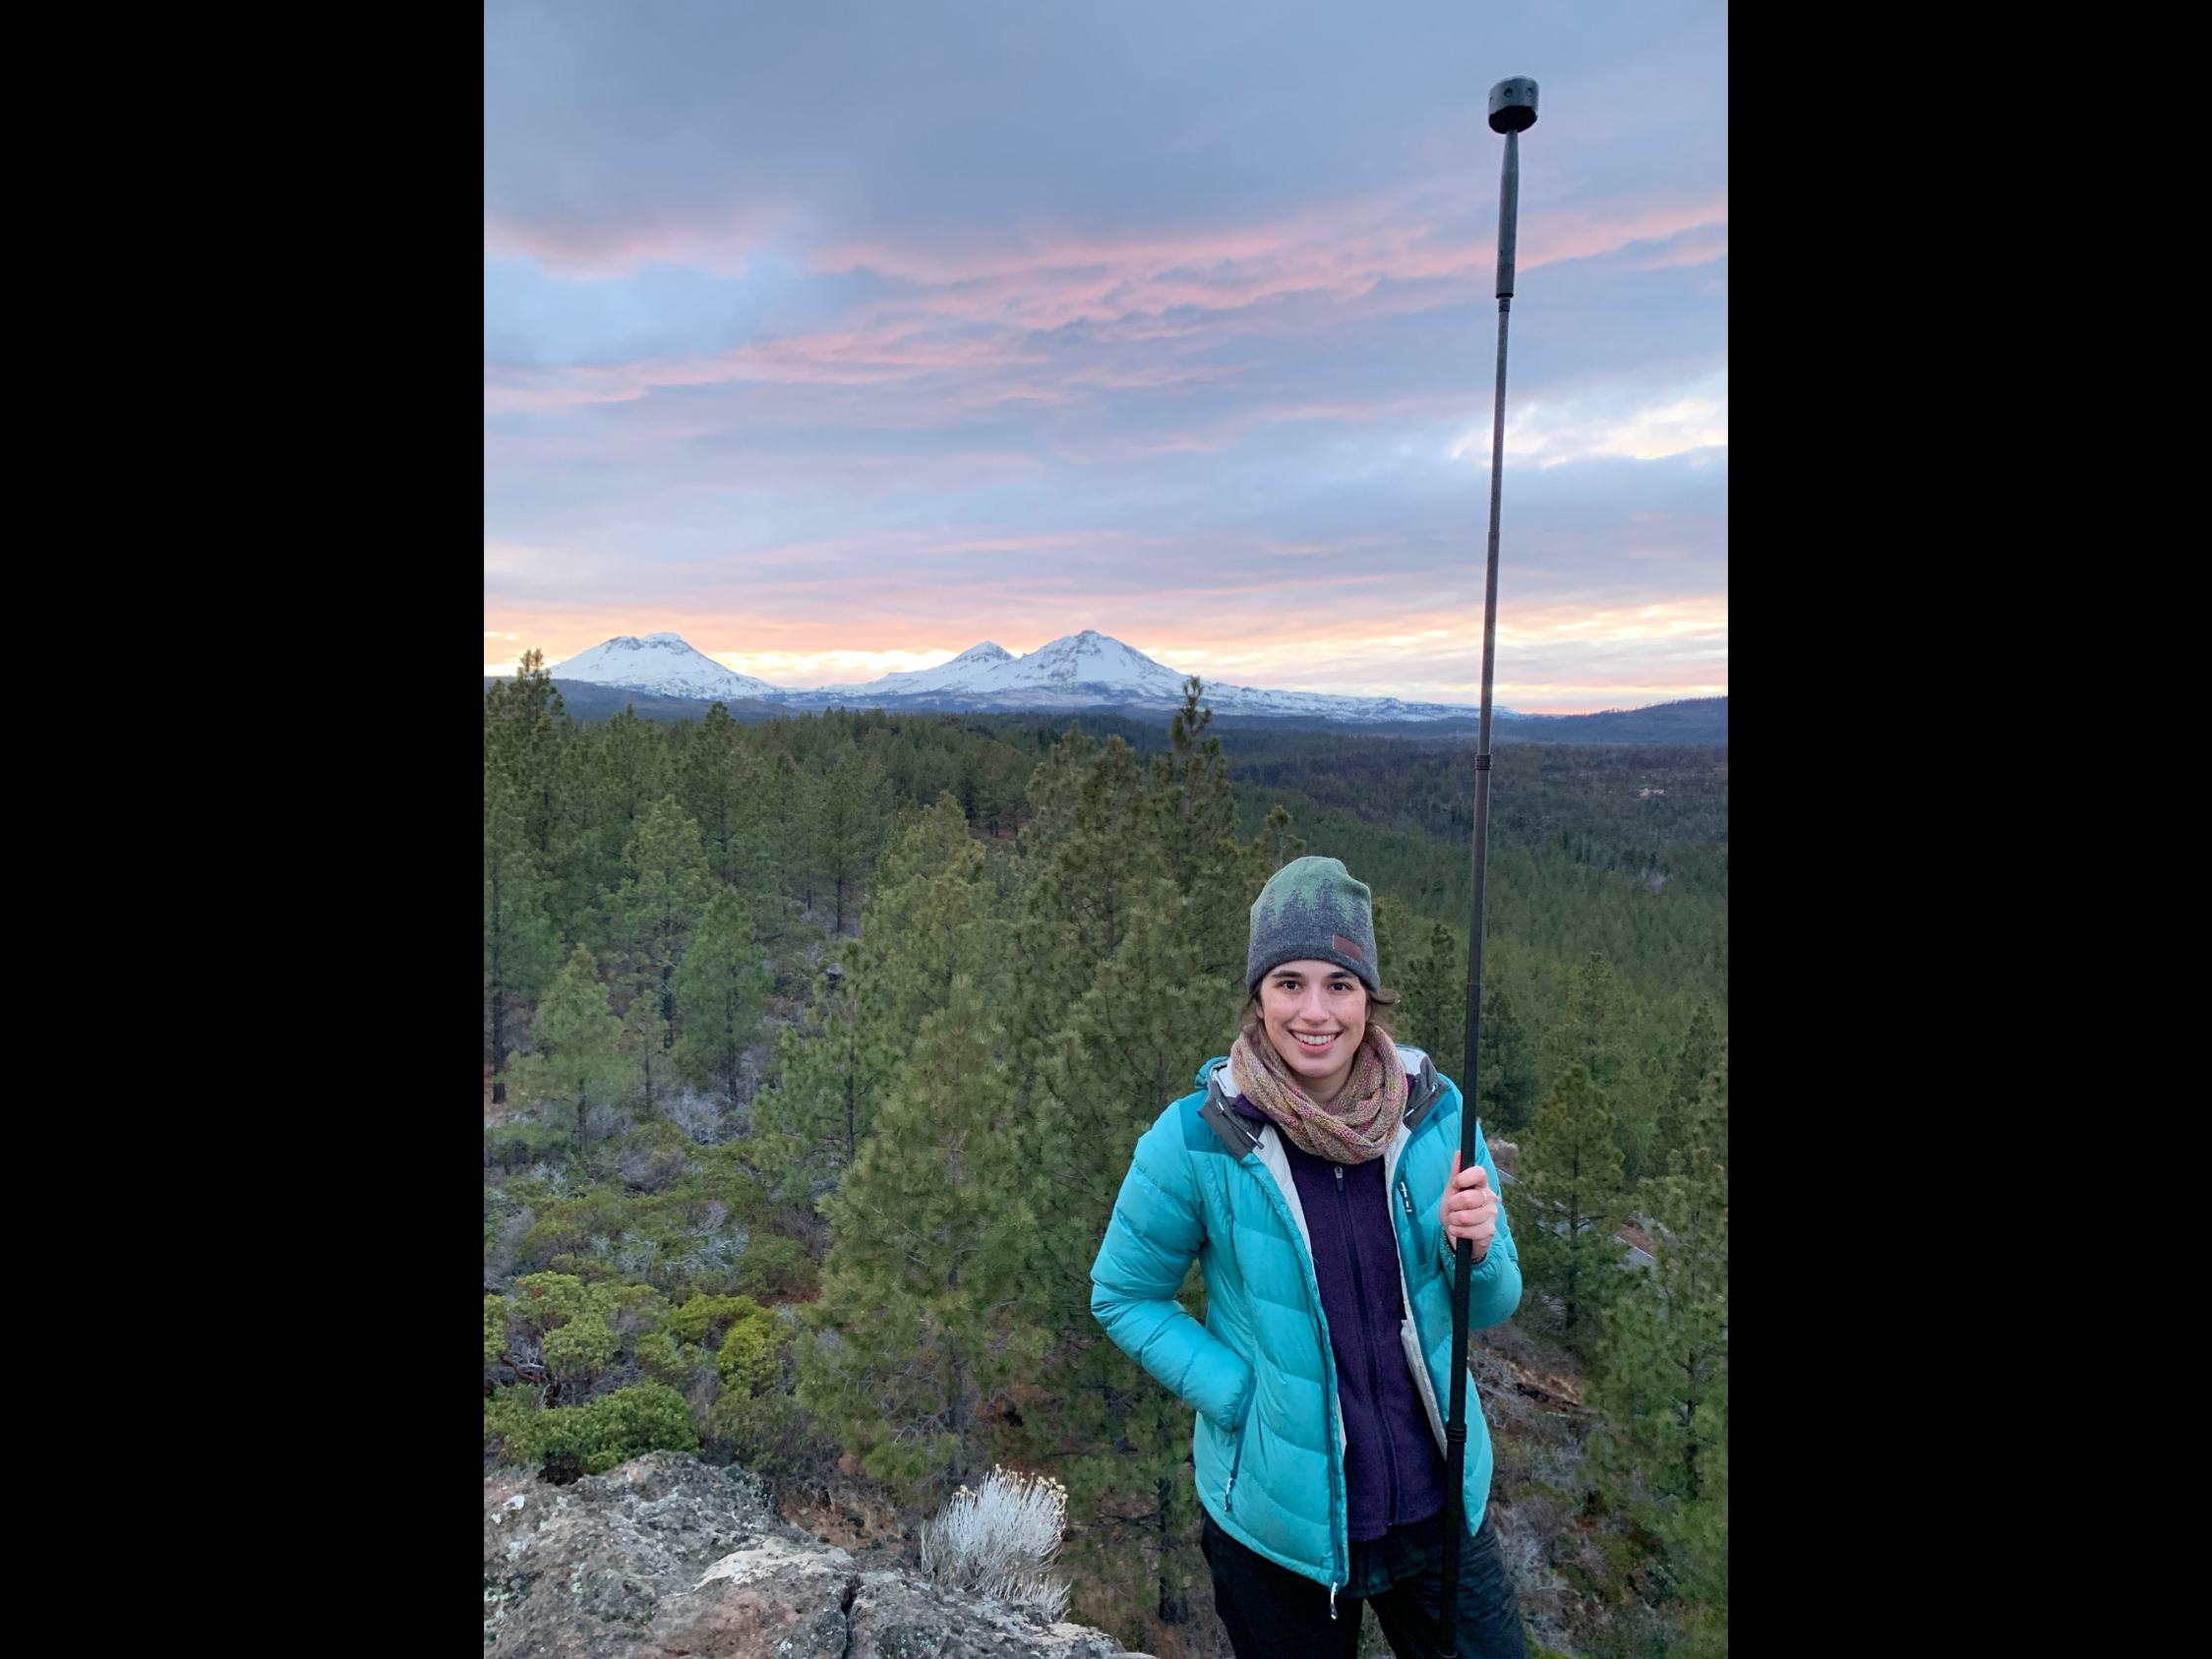 Sarah Greer, a graduate student in mathematics, uses equipment from the MIT.nano Immersion Lab to capture 360-degree images of the mountains of Oregon.